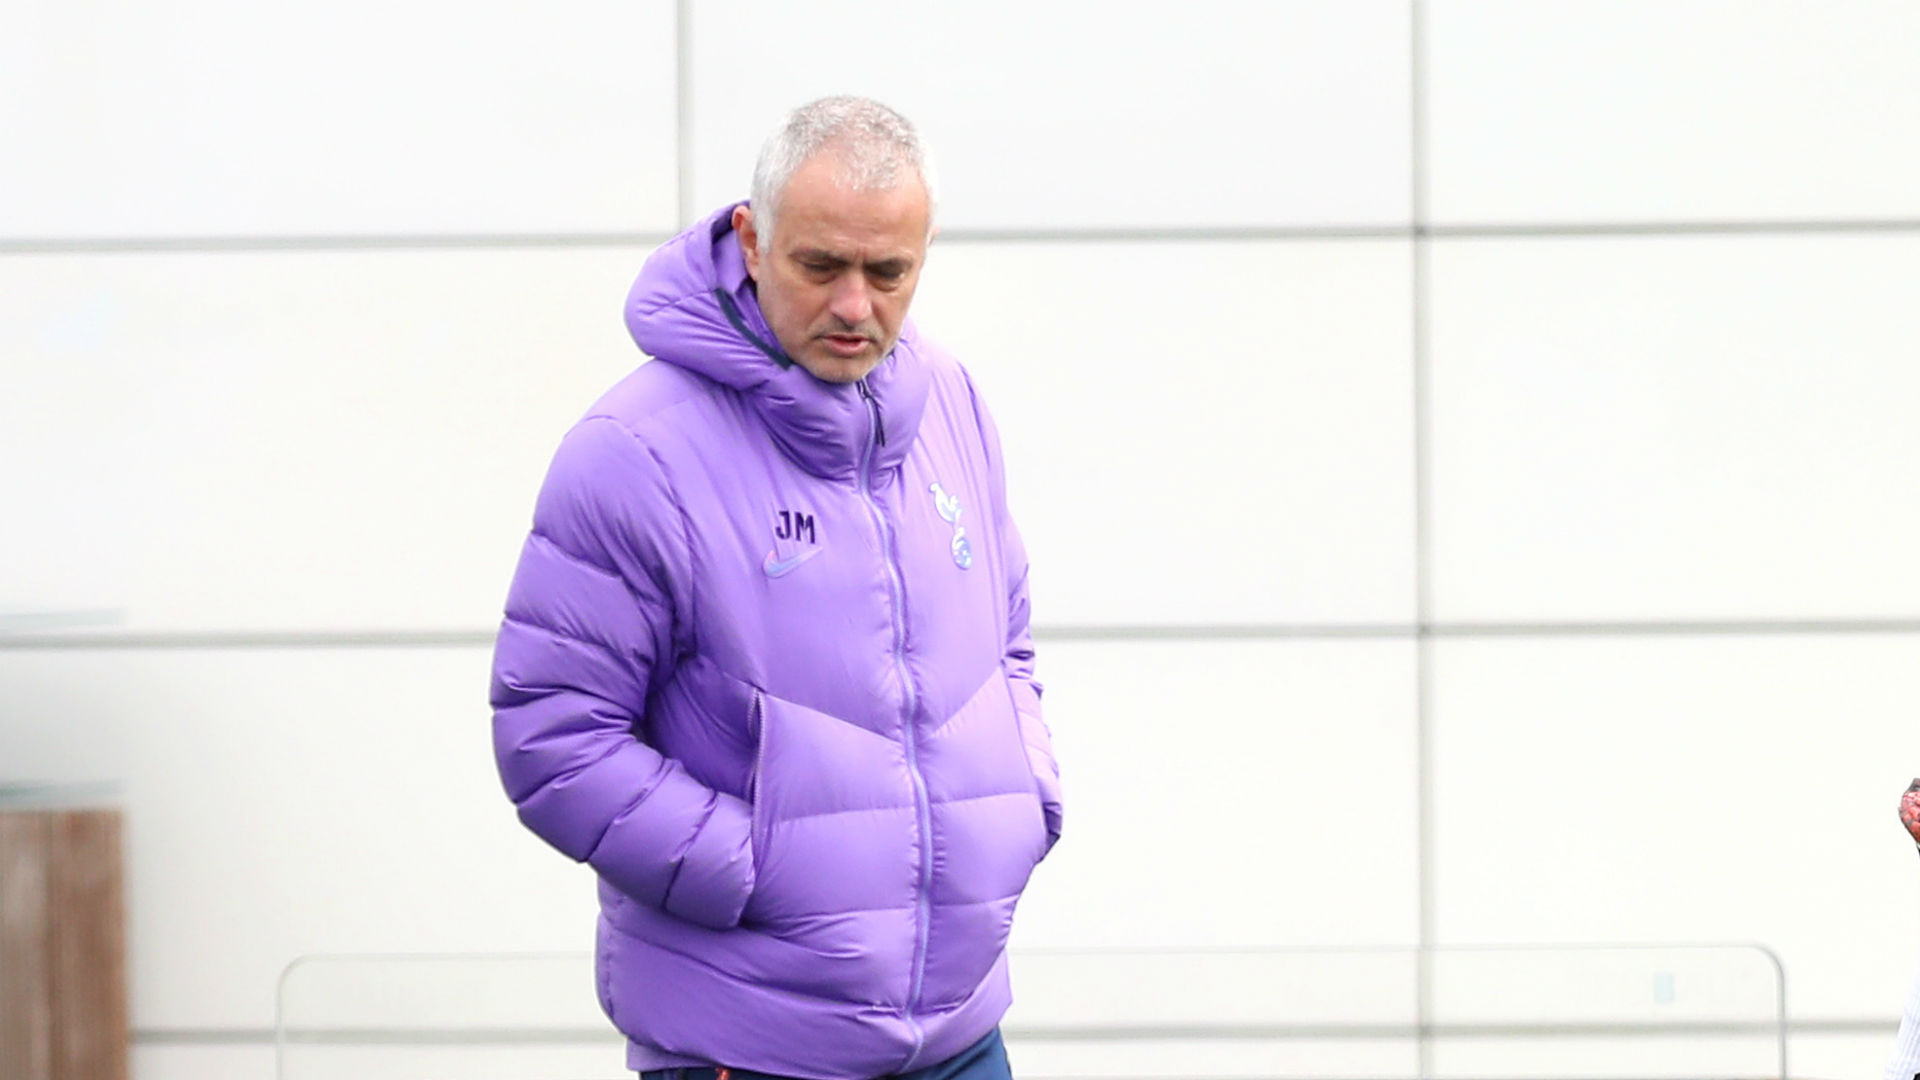 Tottenham boss Jose Mourinho oversaw an outdoor training session with Tanguy Ndombele on Tuesday and accepts he was wrong to do so.